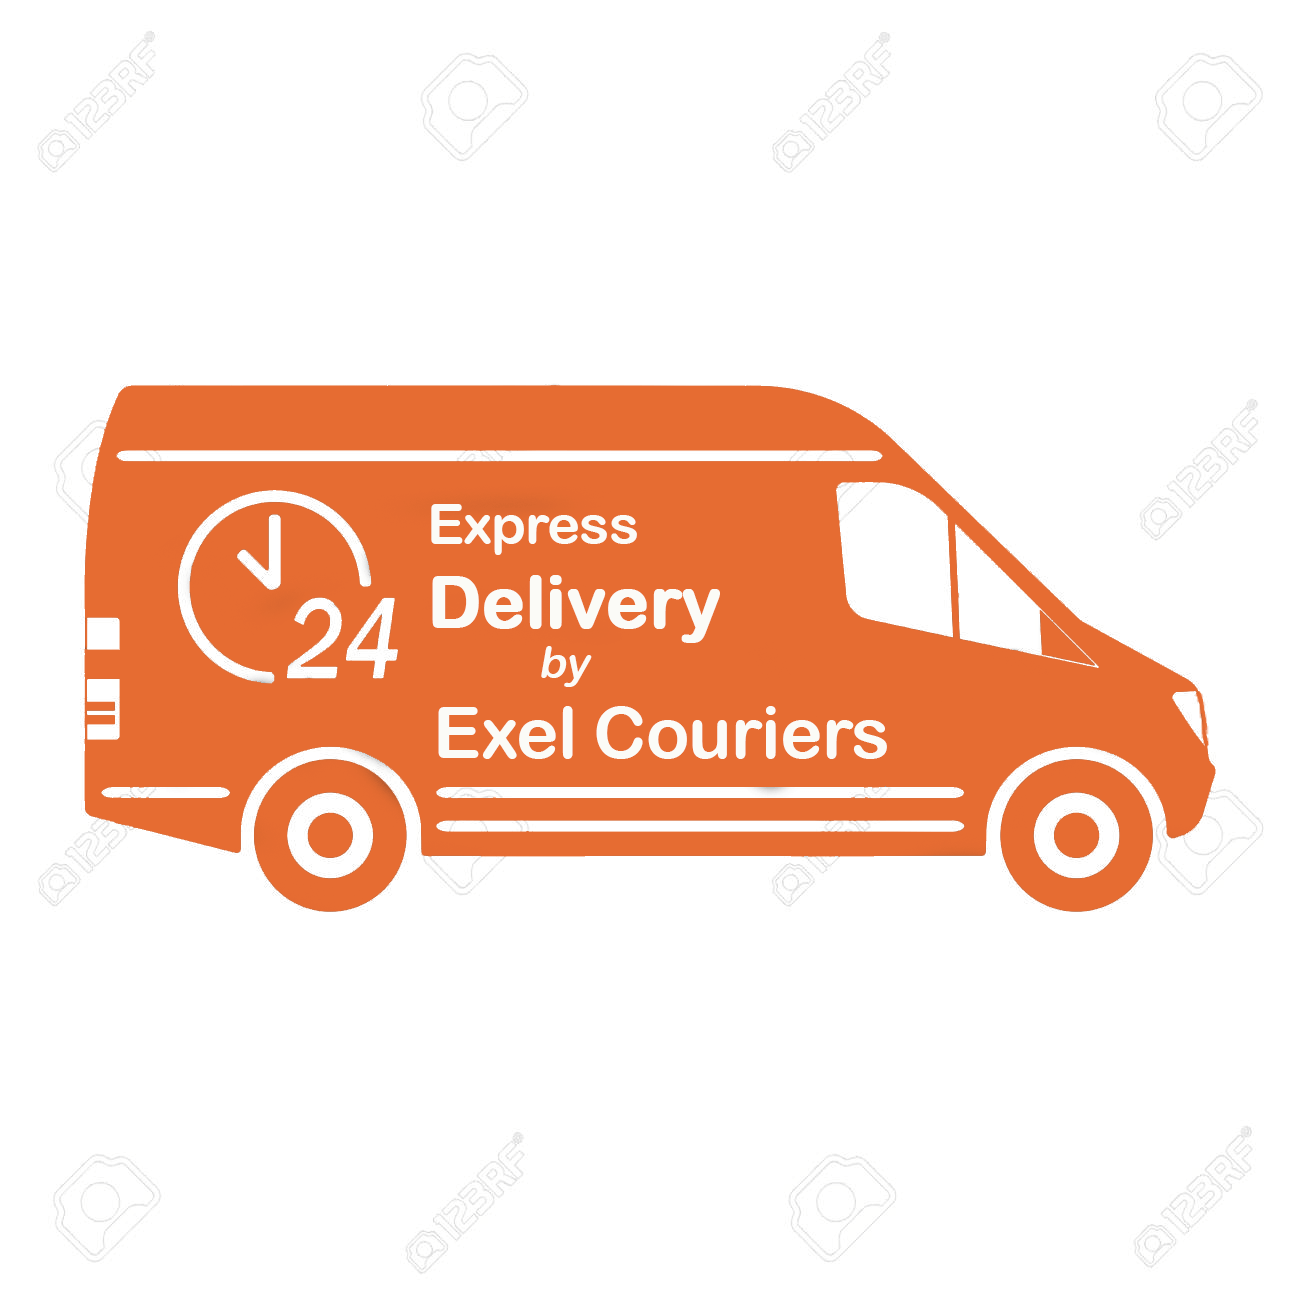 Exel Couriers Express delivery